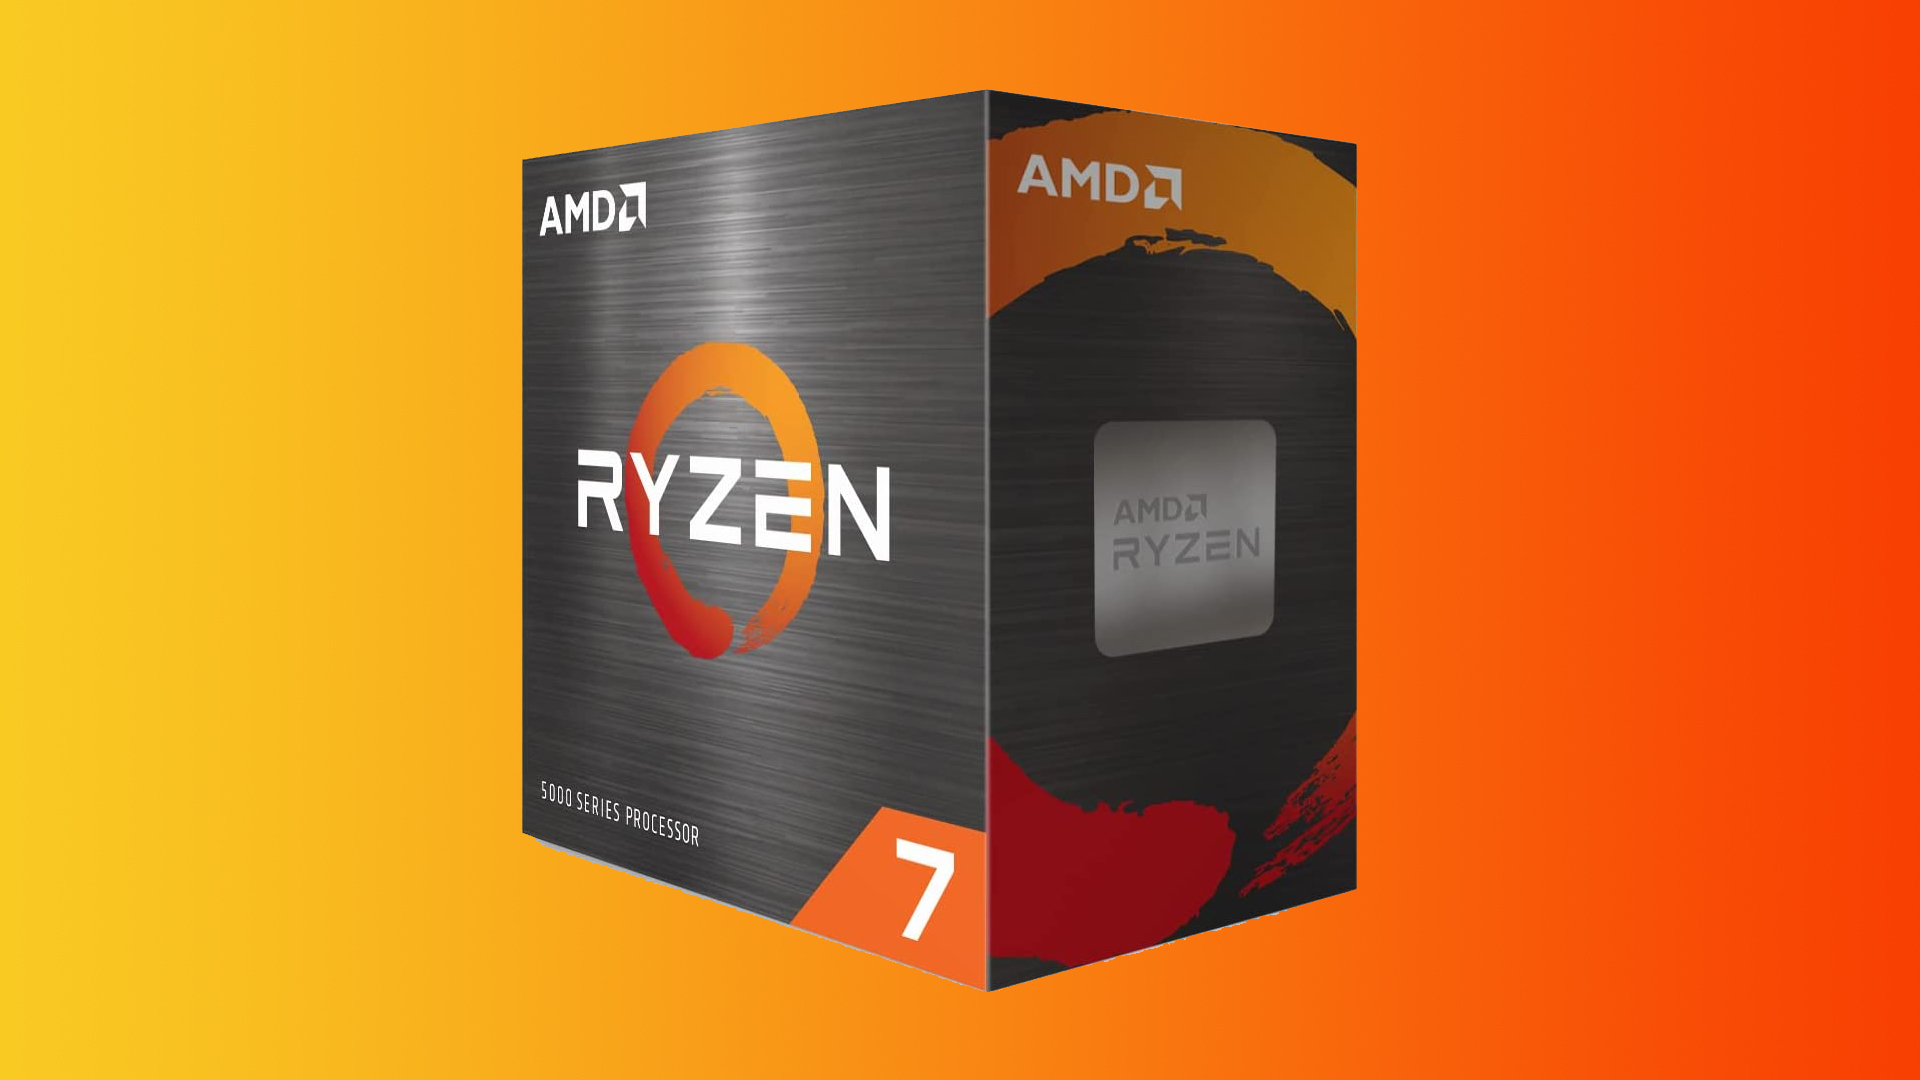 Grab the powerful AMD Ryzen 7 5700X from Amazon for just £168